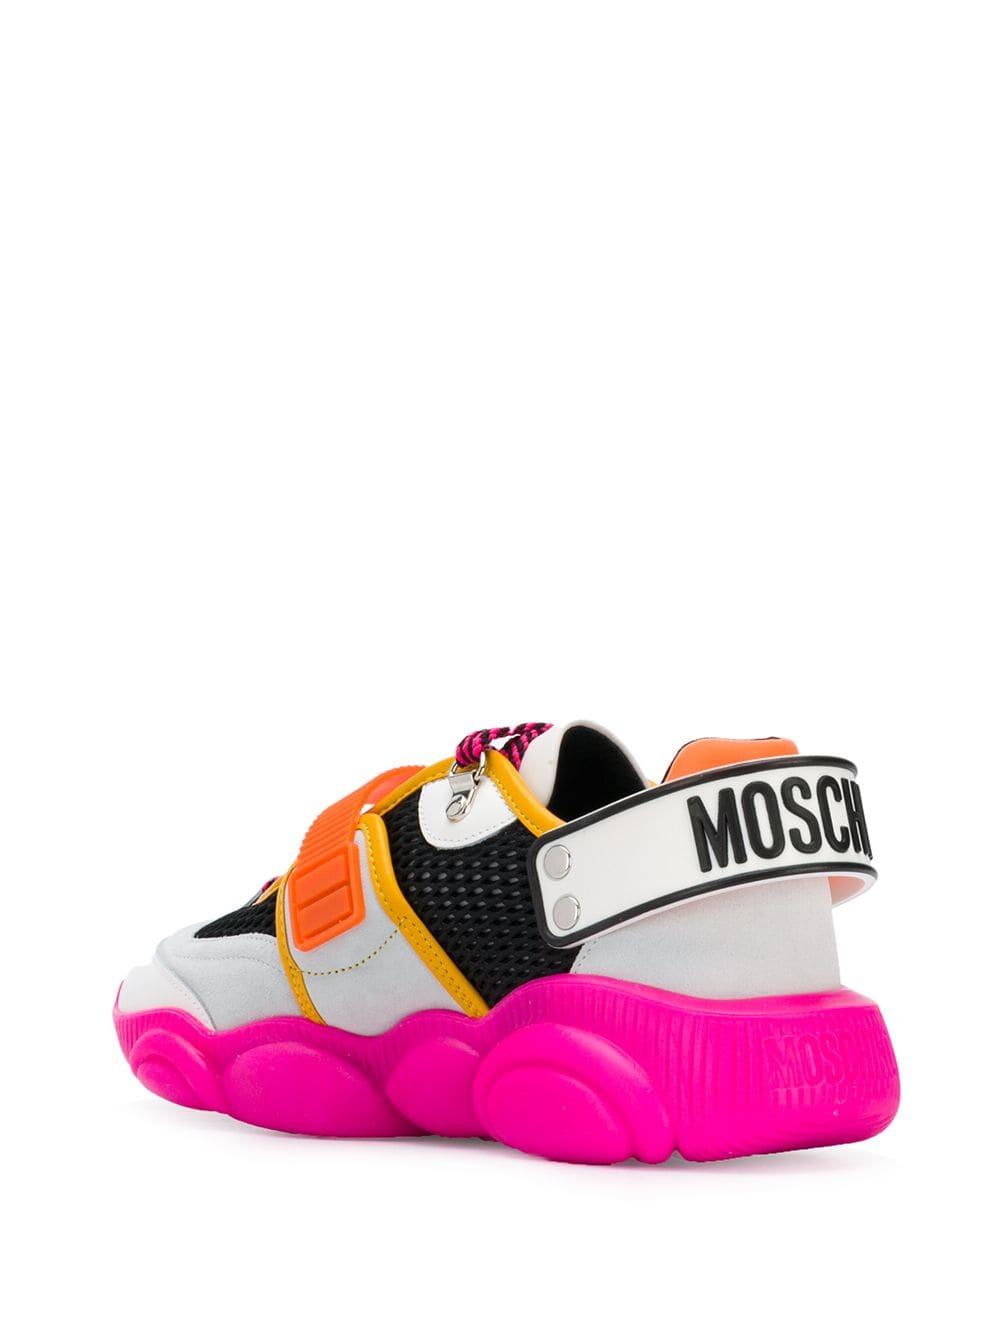 Moschino Synthetic Teddy Sneakers in White - Lyst